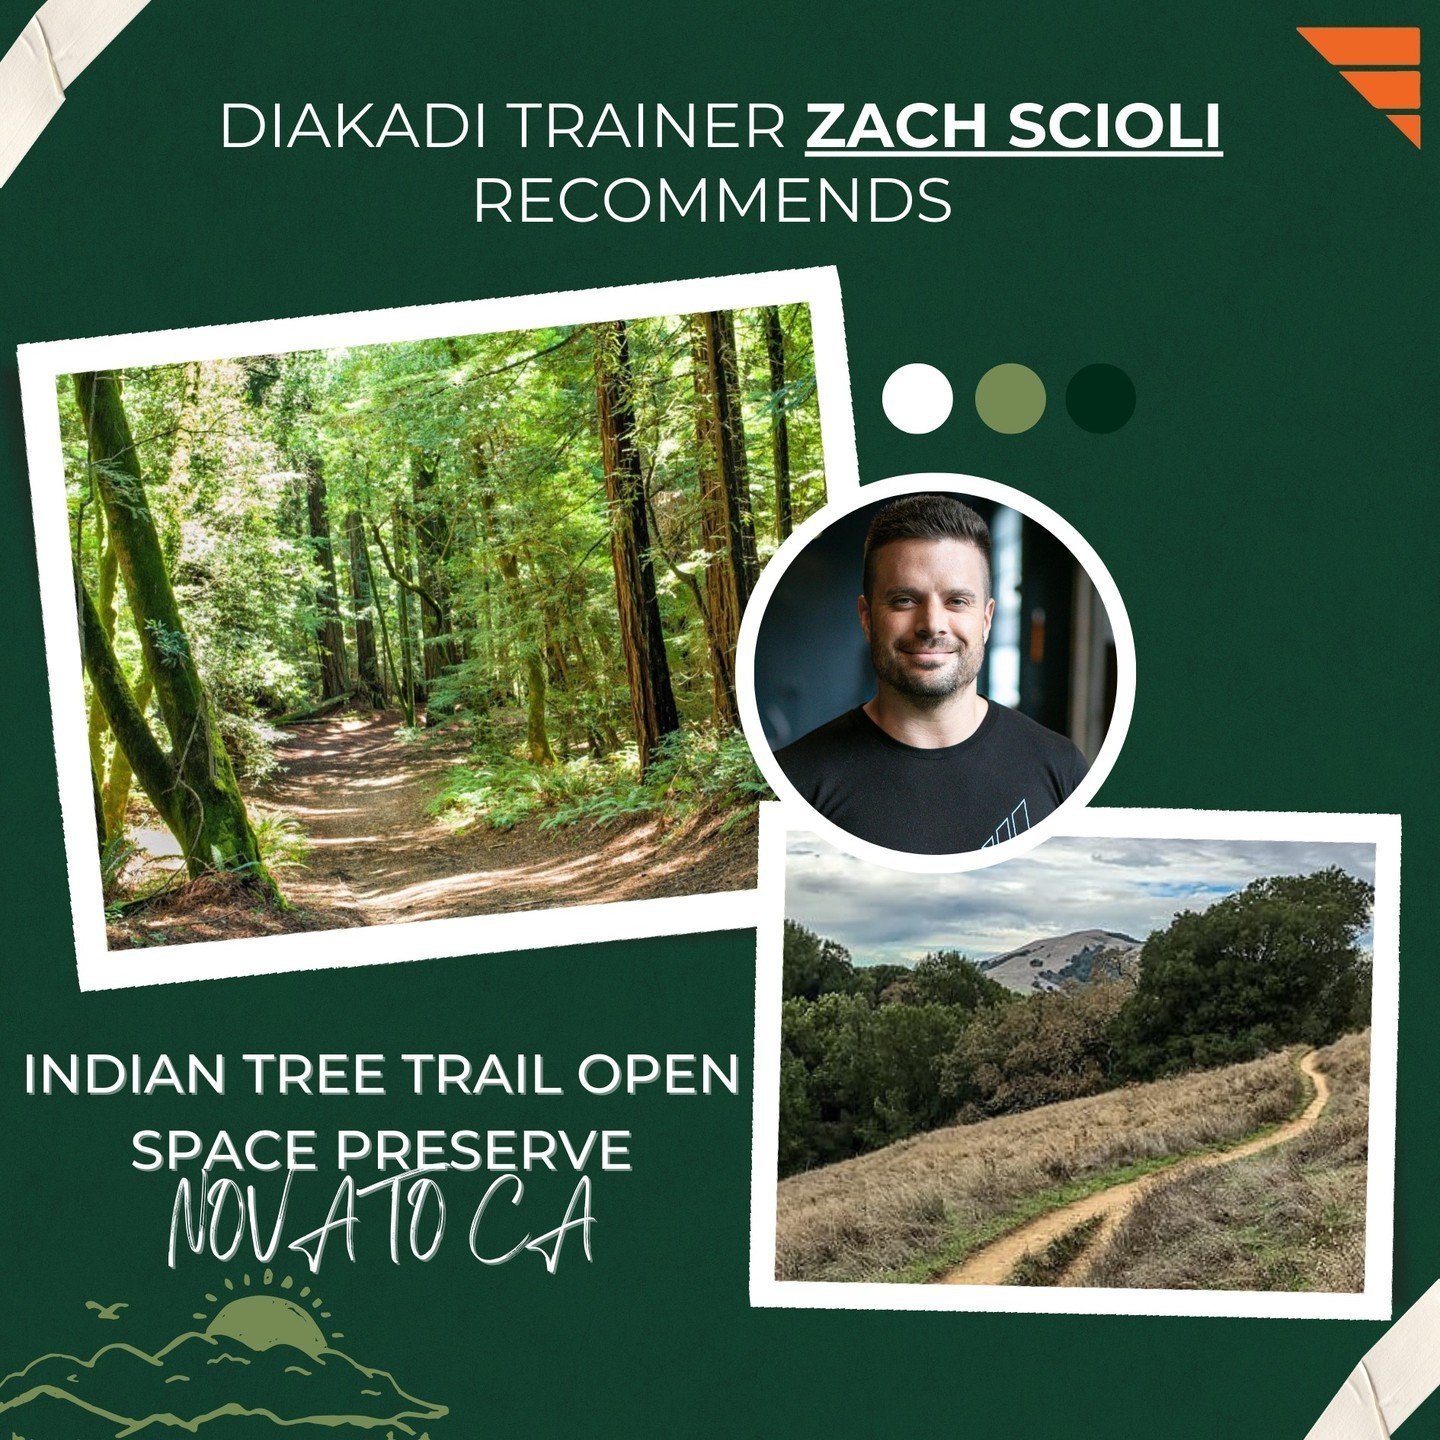 Ready for your next hike? ⁠
⁠
DIAKADI trainer Zach Scioli recommends this adventurous trail in Novato, CA! ⁠
⁠
Located in west Novato, at the end of a quiet neighborhood on Vineyard Road, this is a hike for tree lovers, as the trails ascend through d